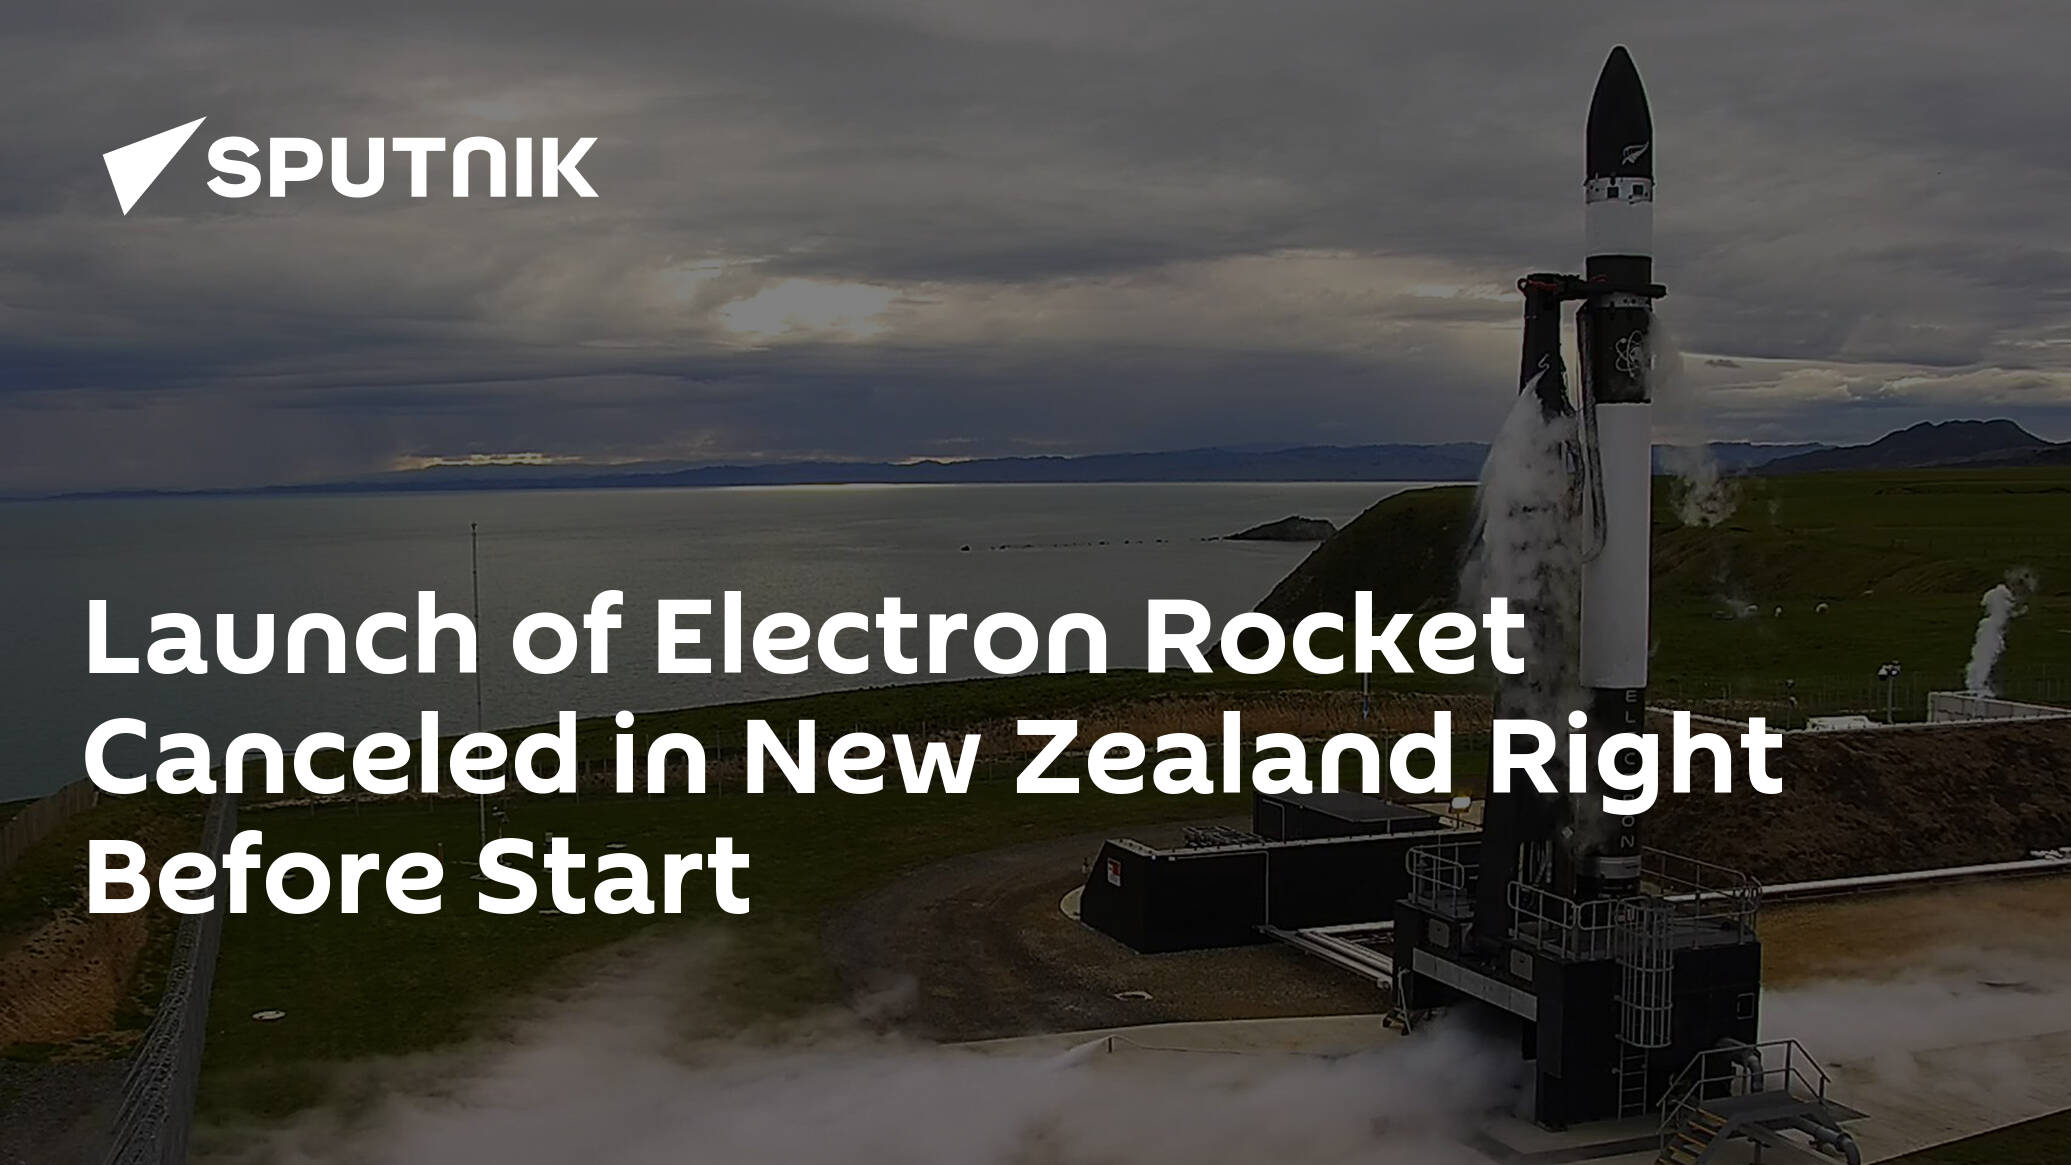 Launch of Electron Rocket Canceled in New Zealand Right Before Start